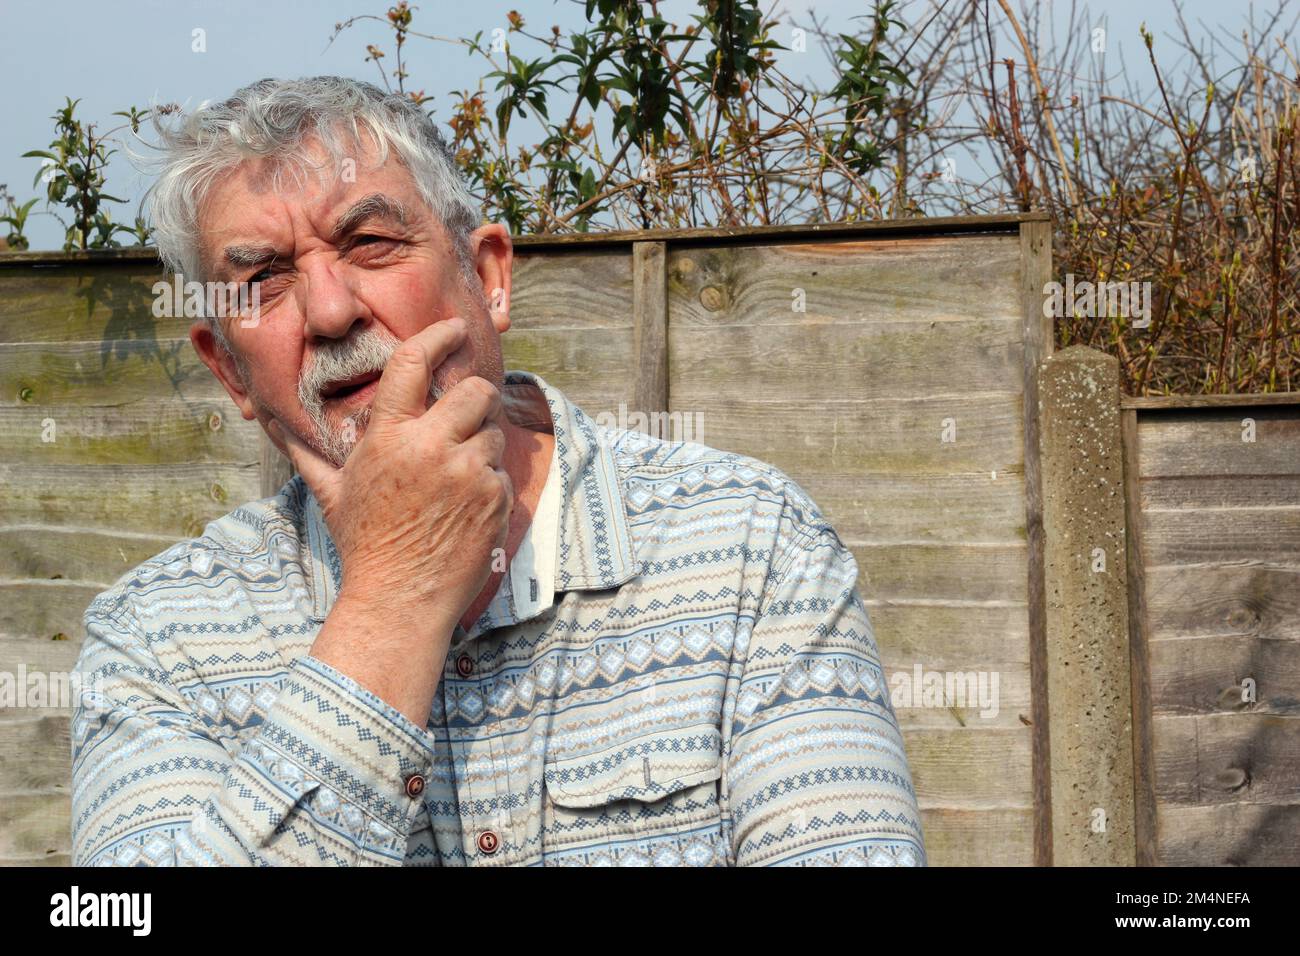 old or senior man looking puzzled and confused. Working out the answer. Stock Photo